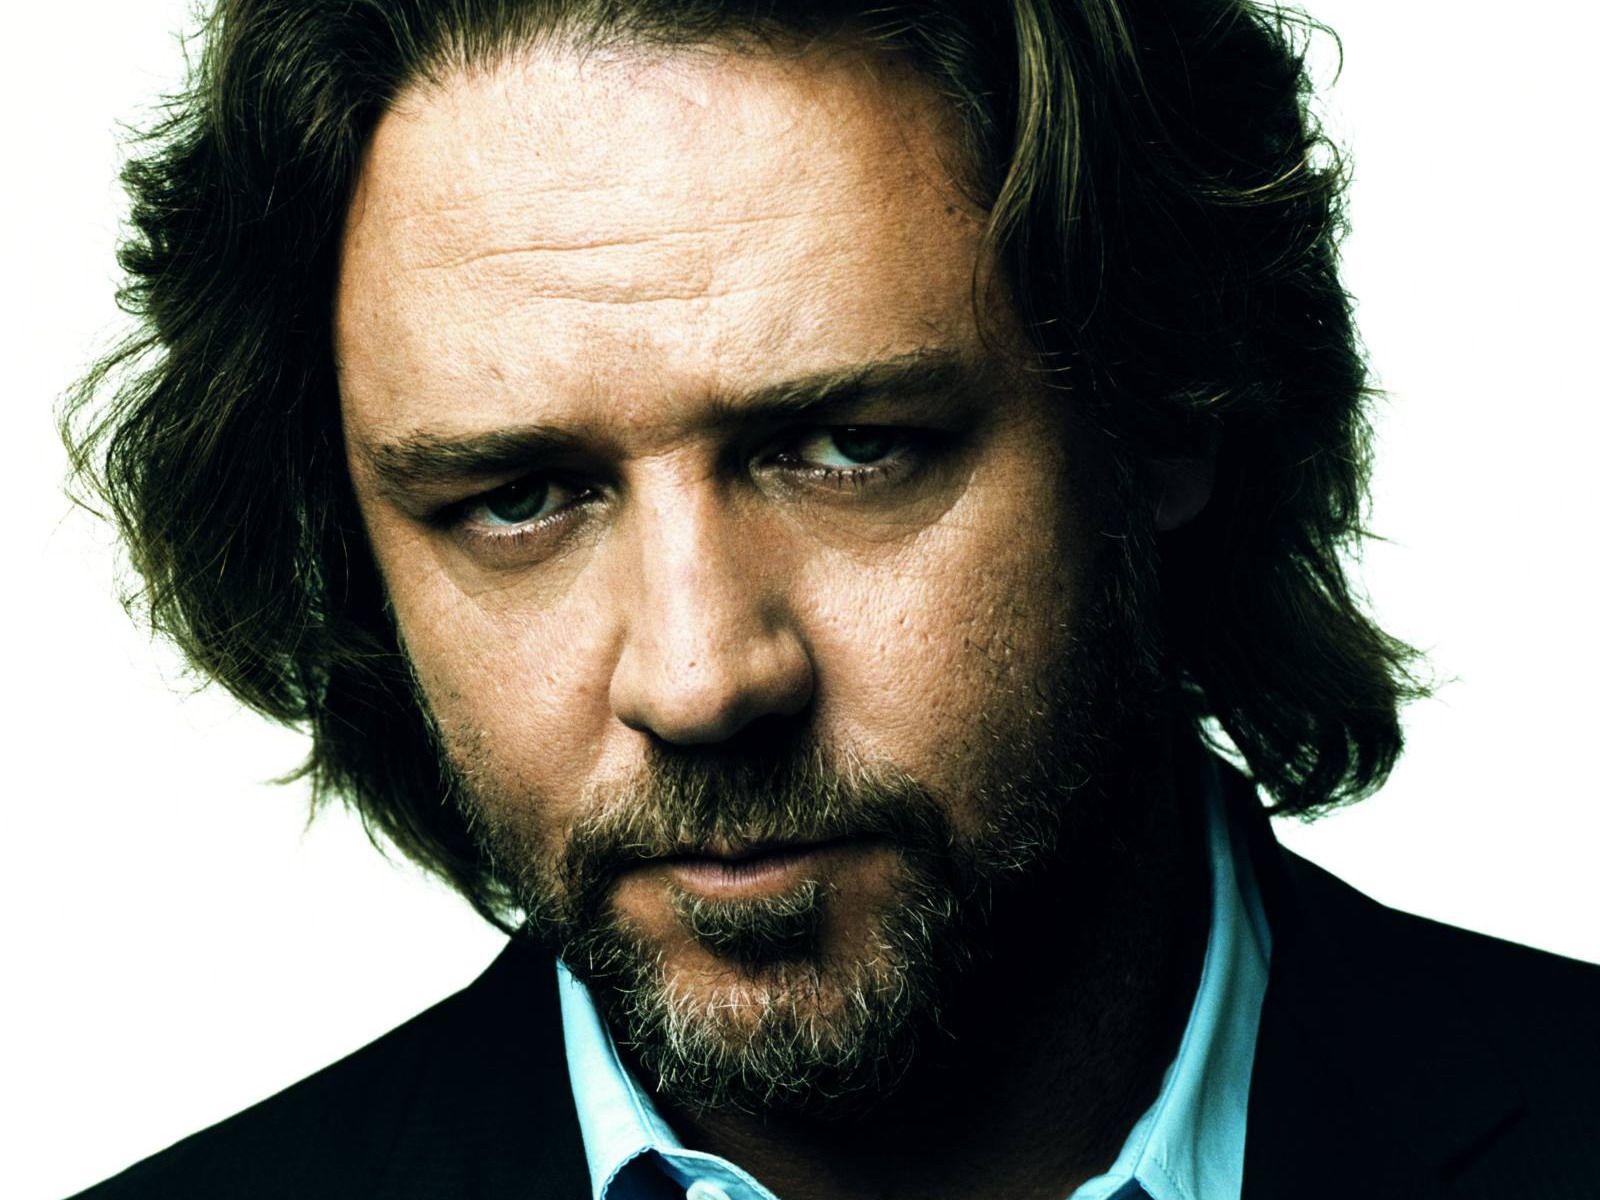 Russell Crowe Face Wallpaper 52377 1600x1200 px